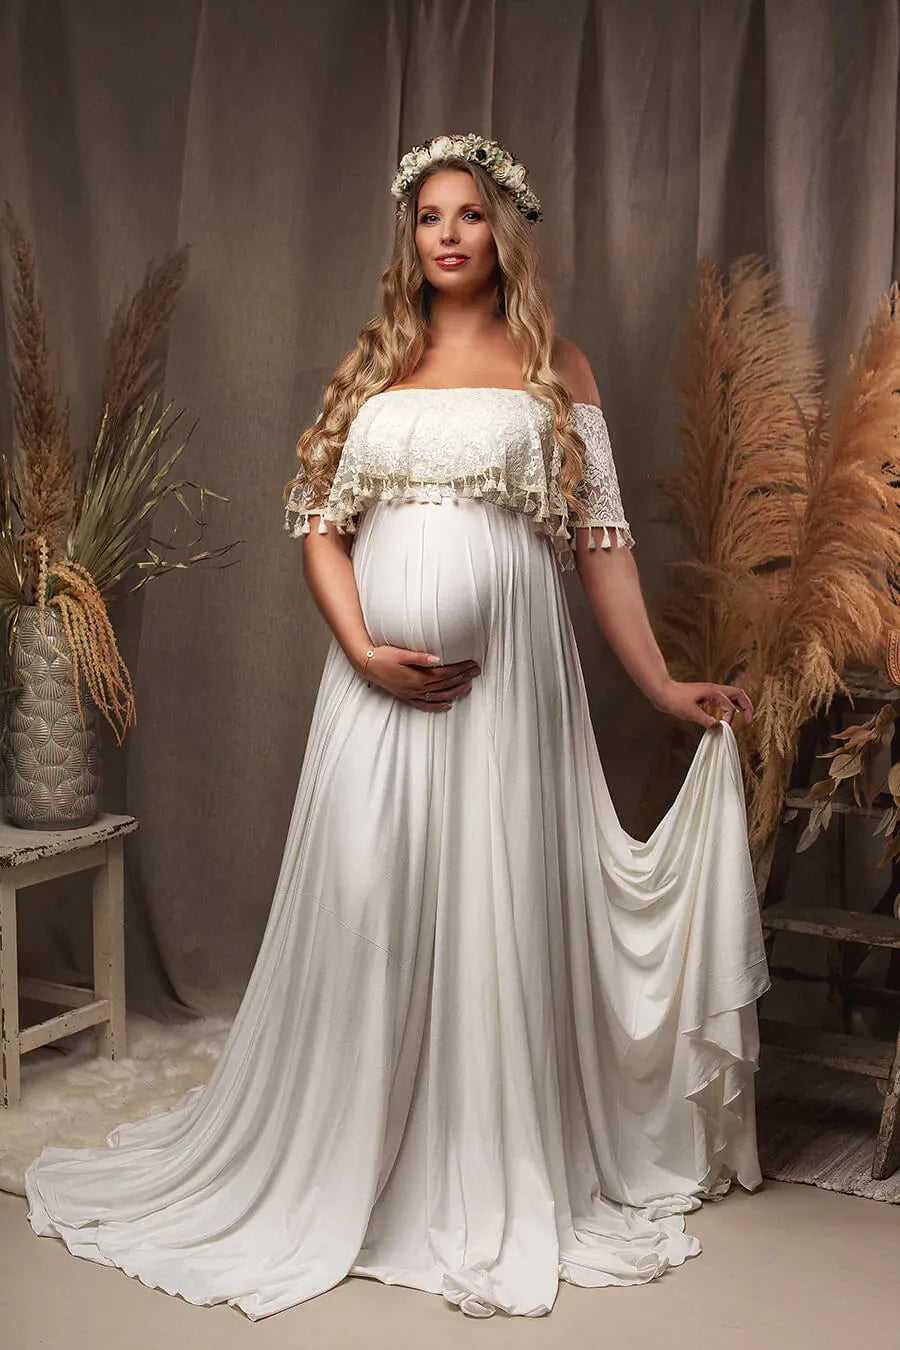 Pregnant Woman Dress For Photography